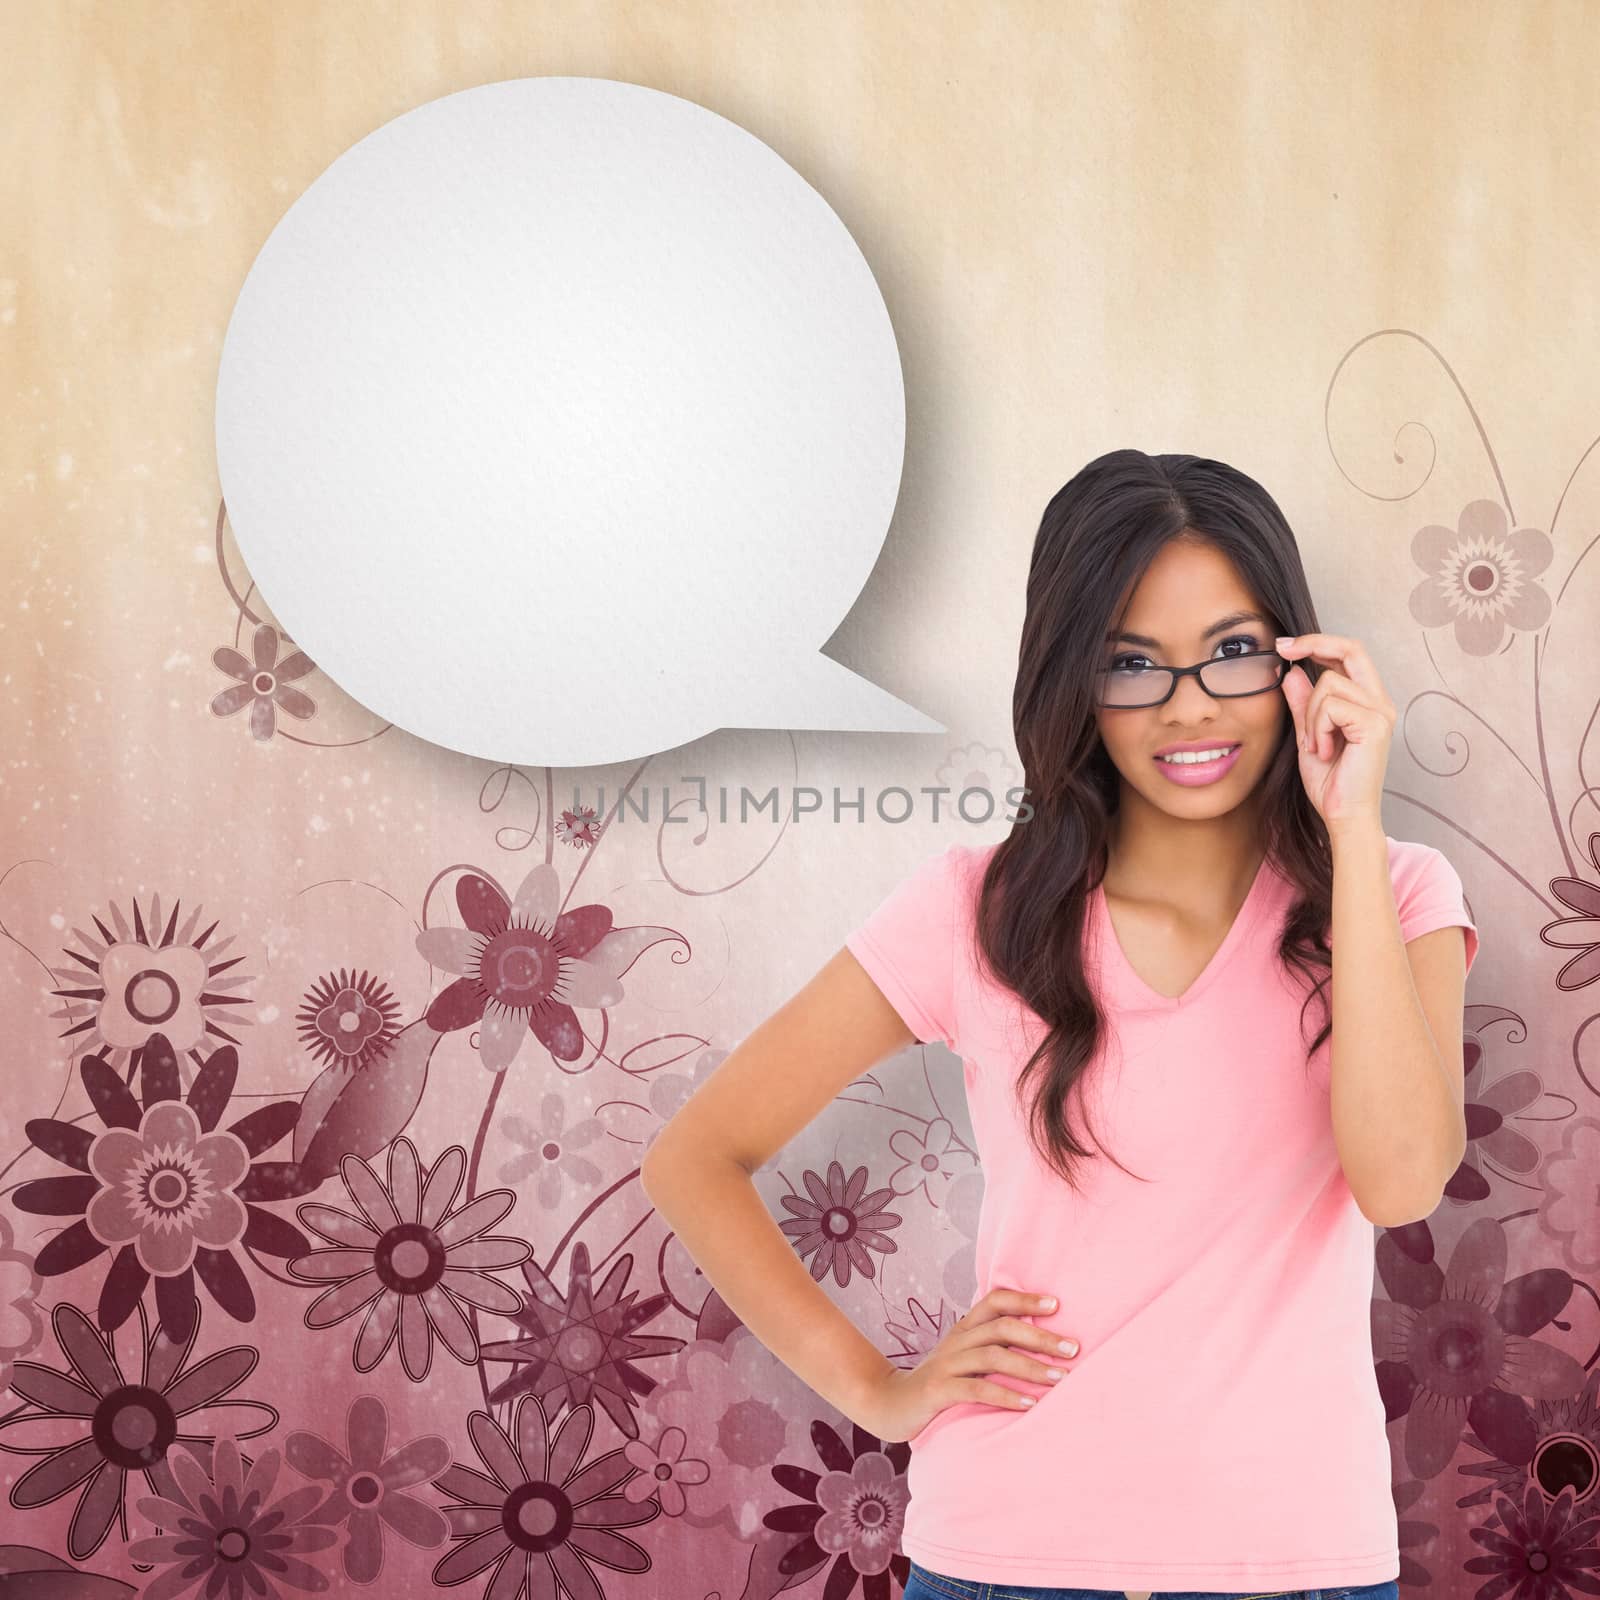 Pretty brunette thinking with speech bubble against digitally generated girly floral design